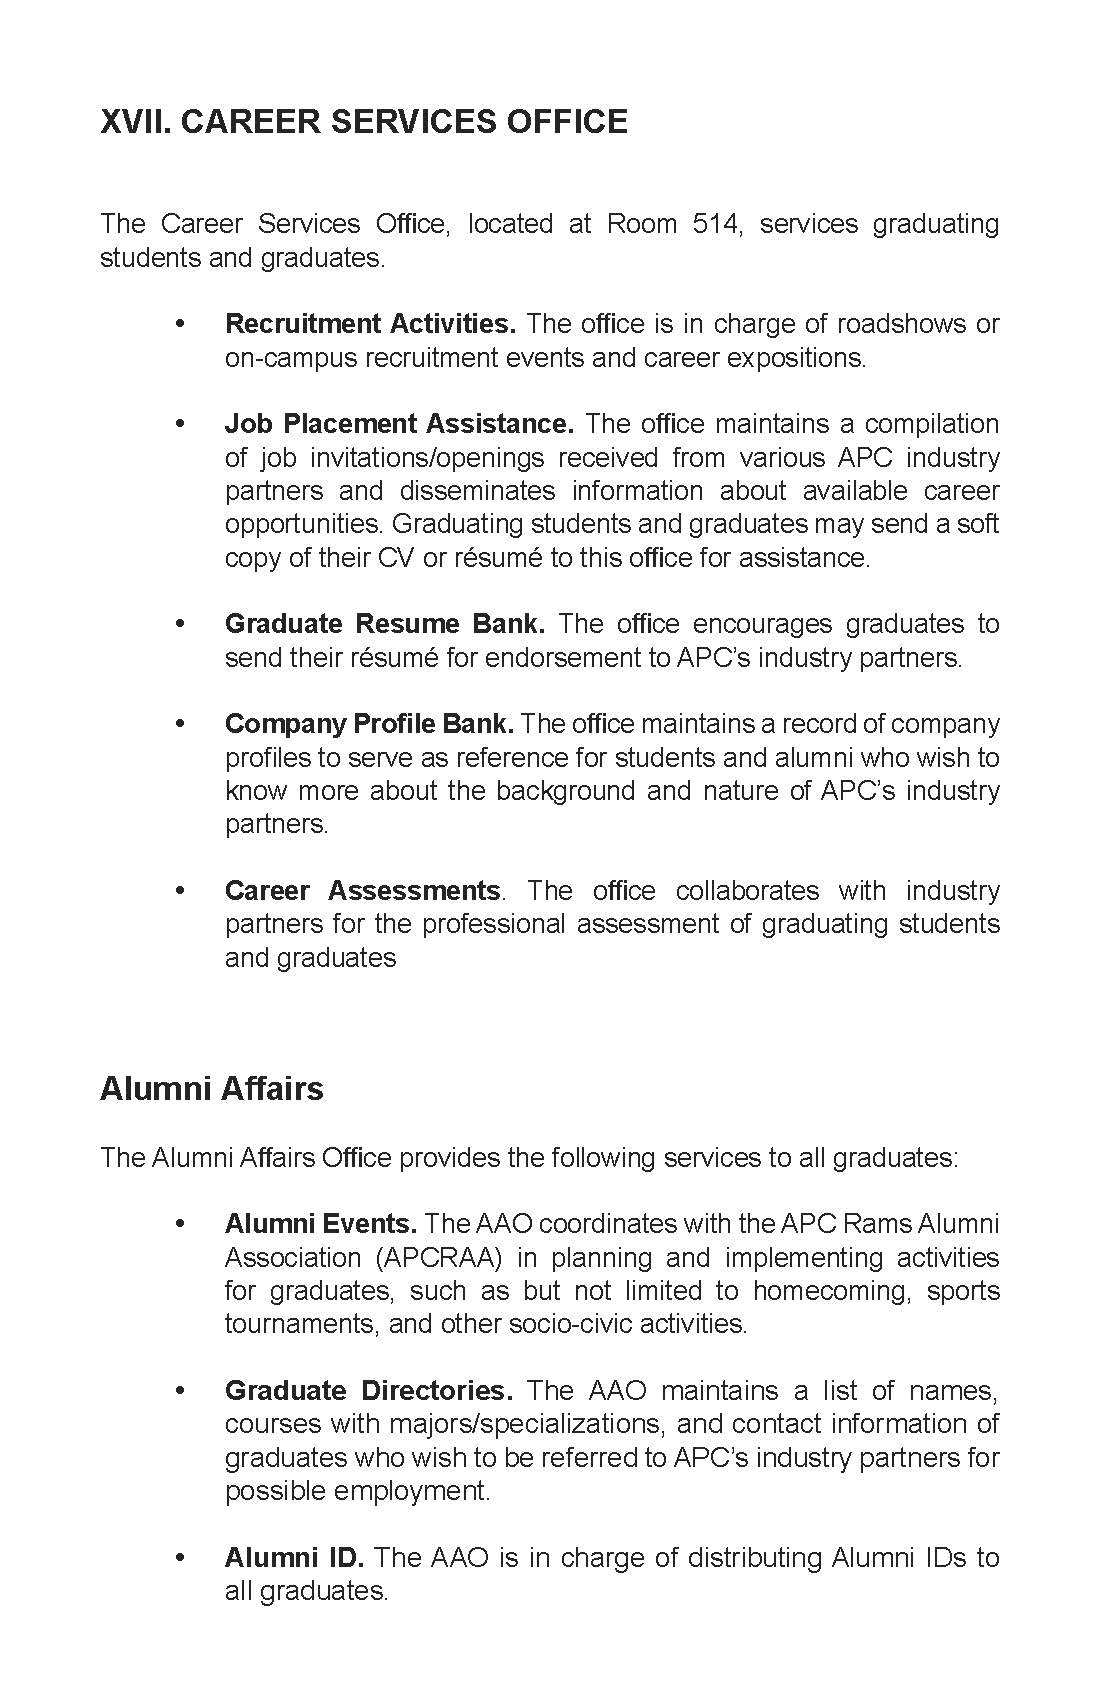 Career Services Playbook_Page_1